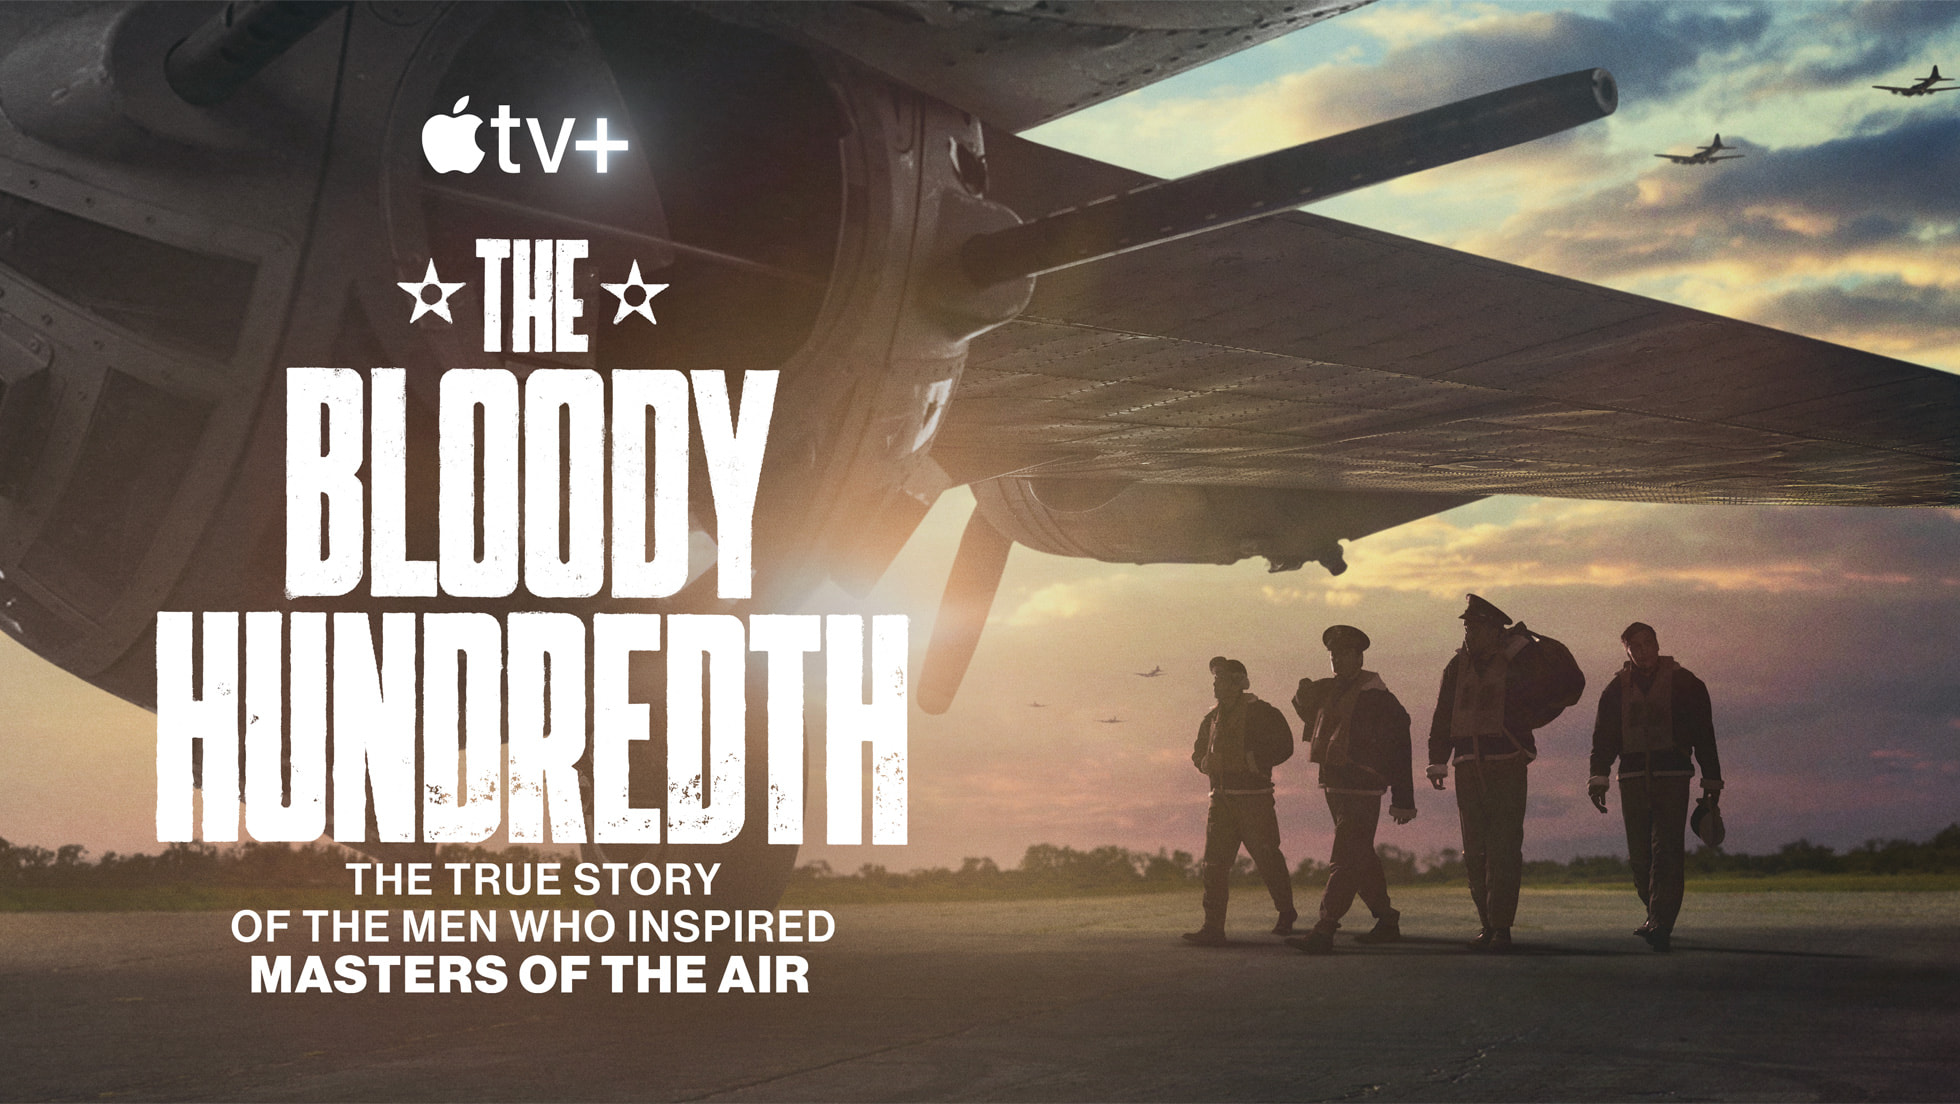 Apple TV+ to premiere new documentary “The Bloody Hundredth” in